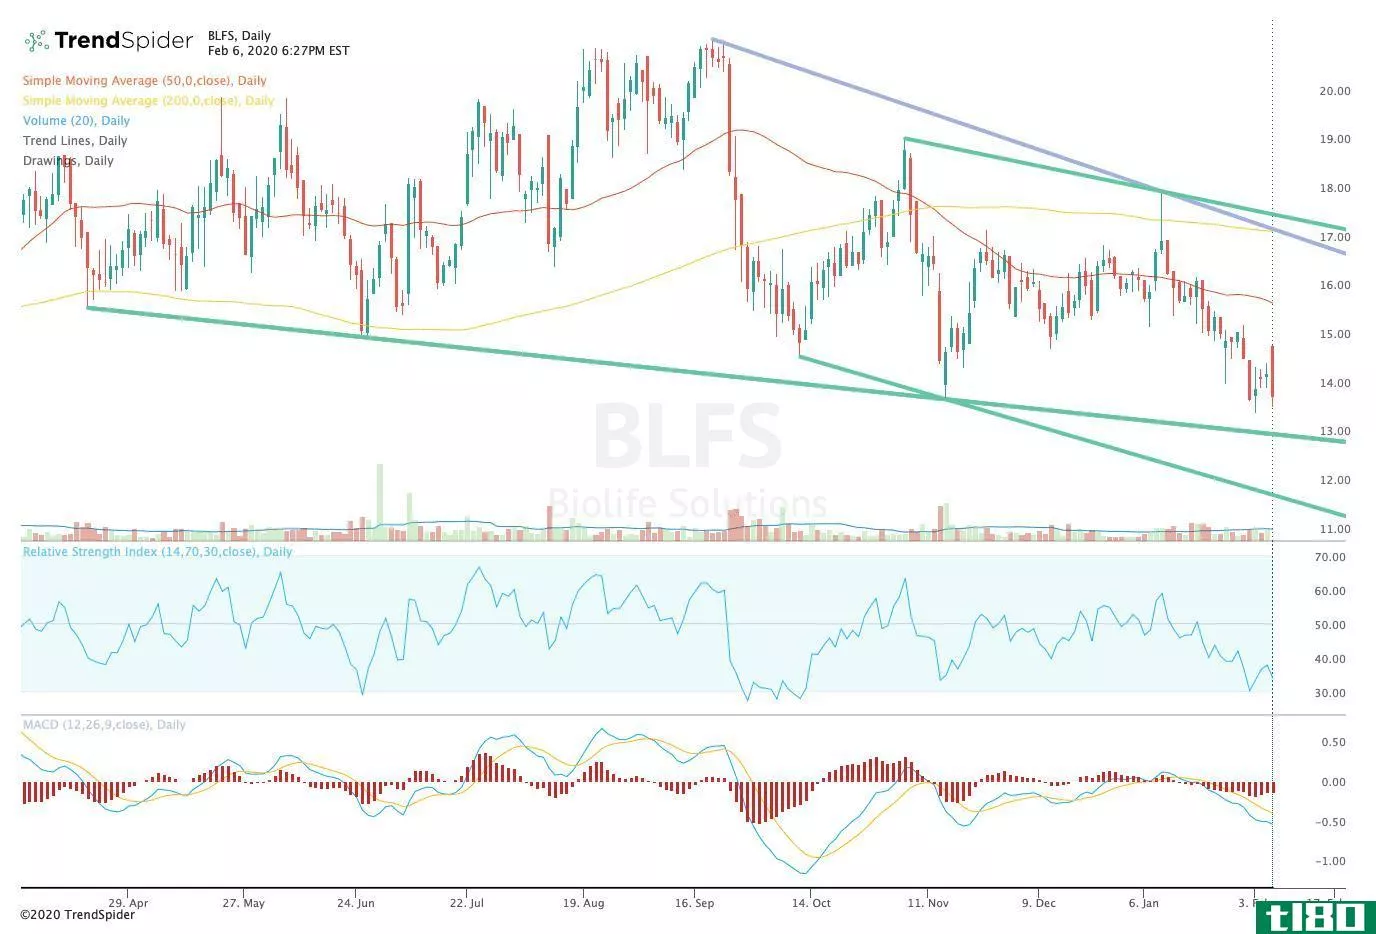 Chart showing the share price performance of BioLife Soluti***, Inc. (BLFS)